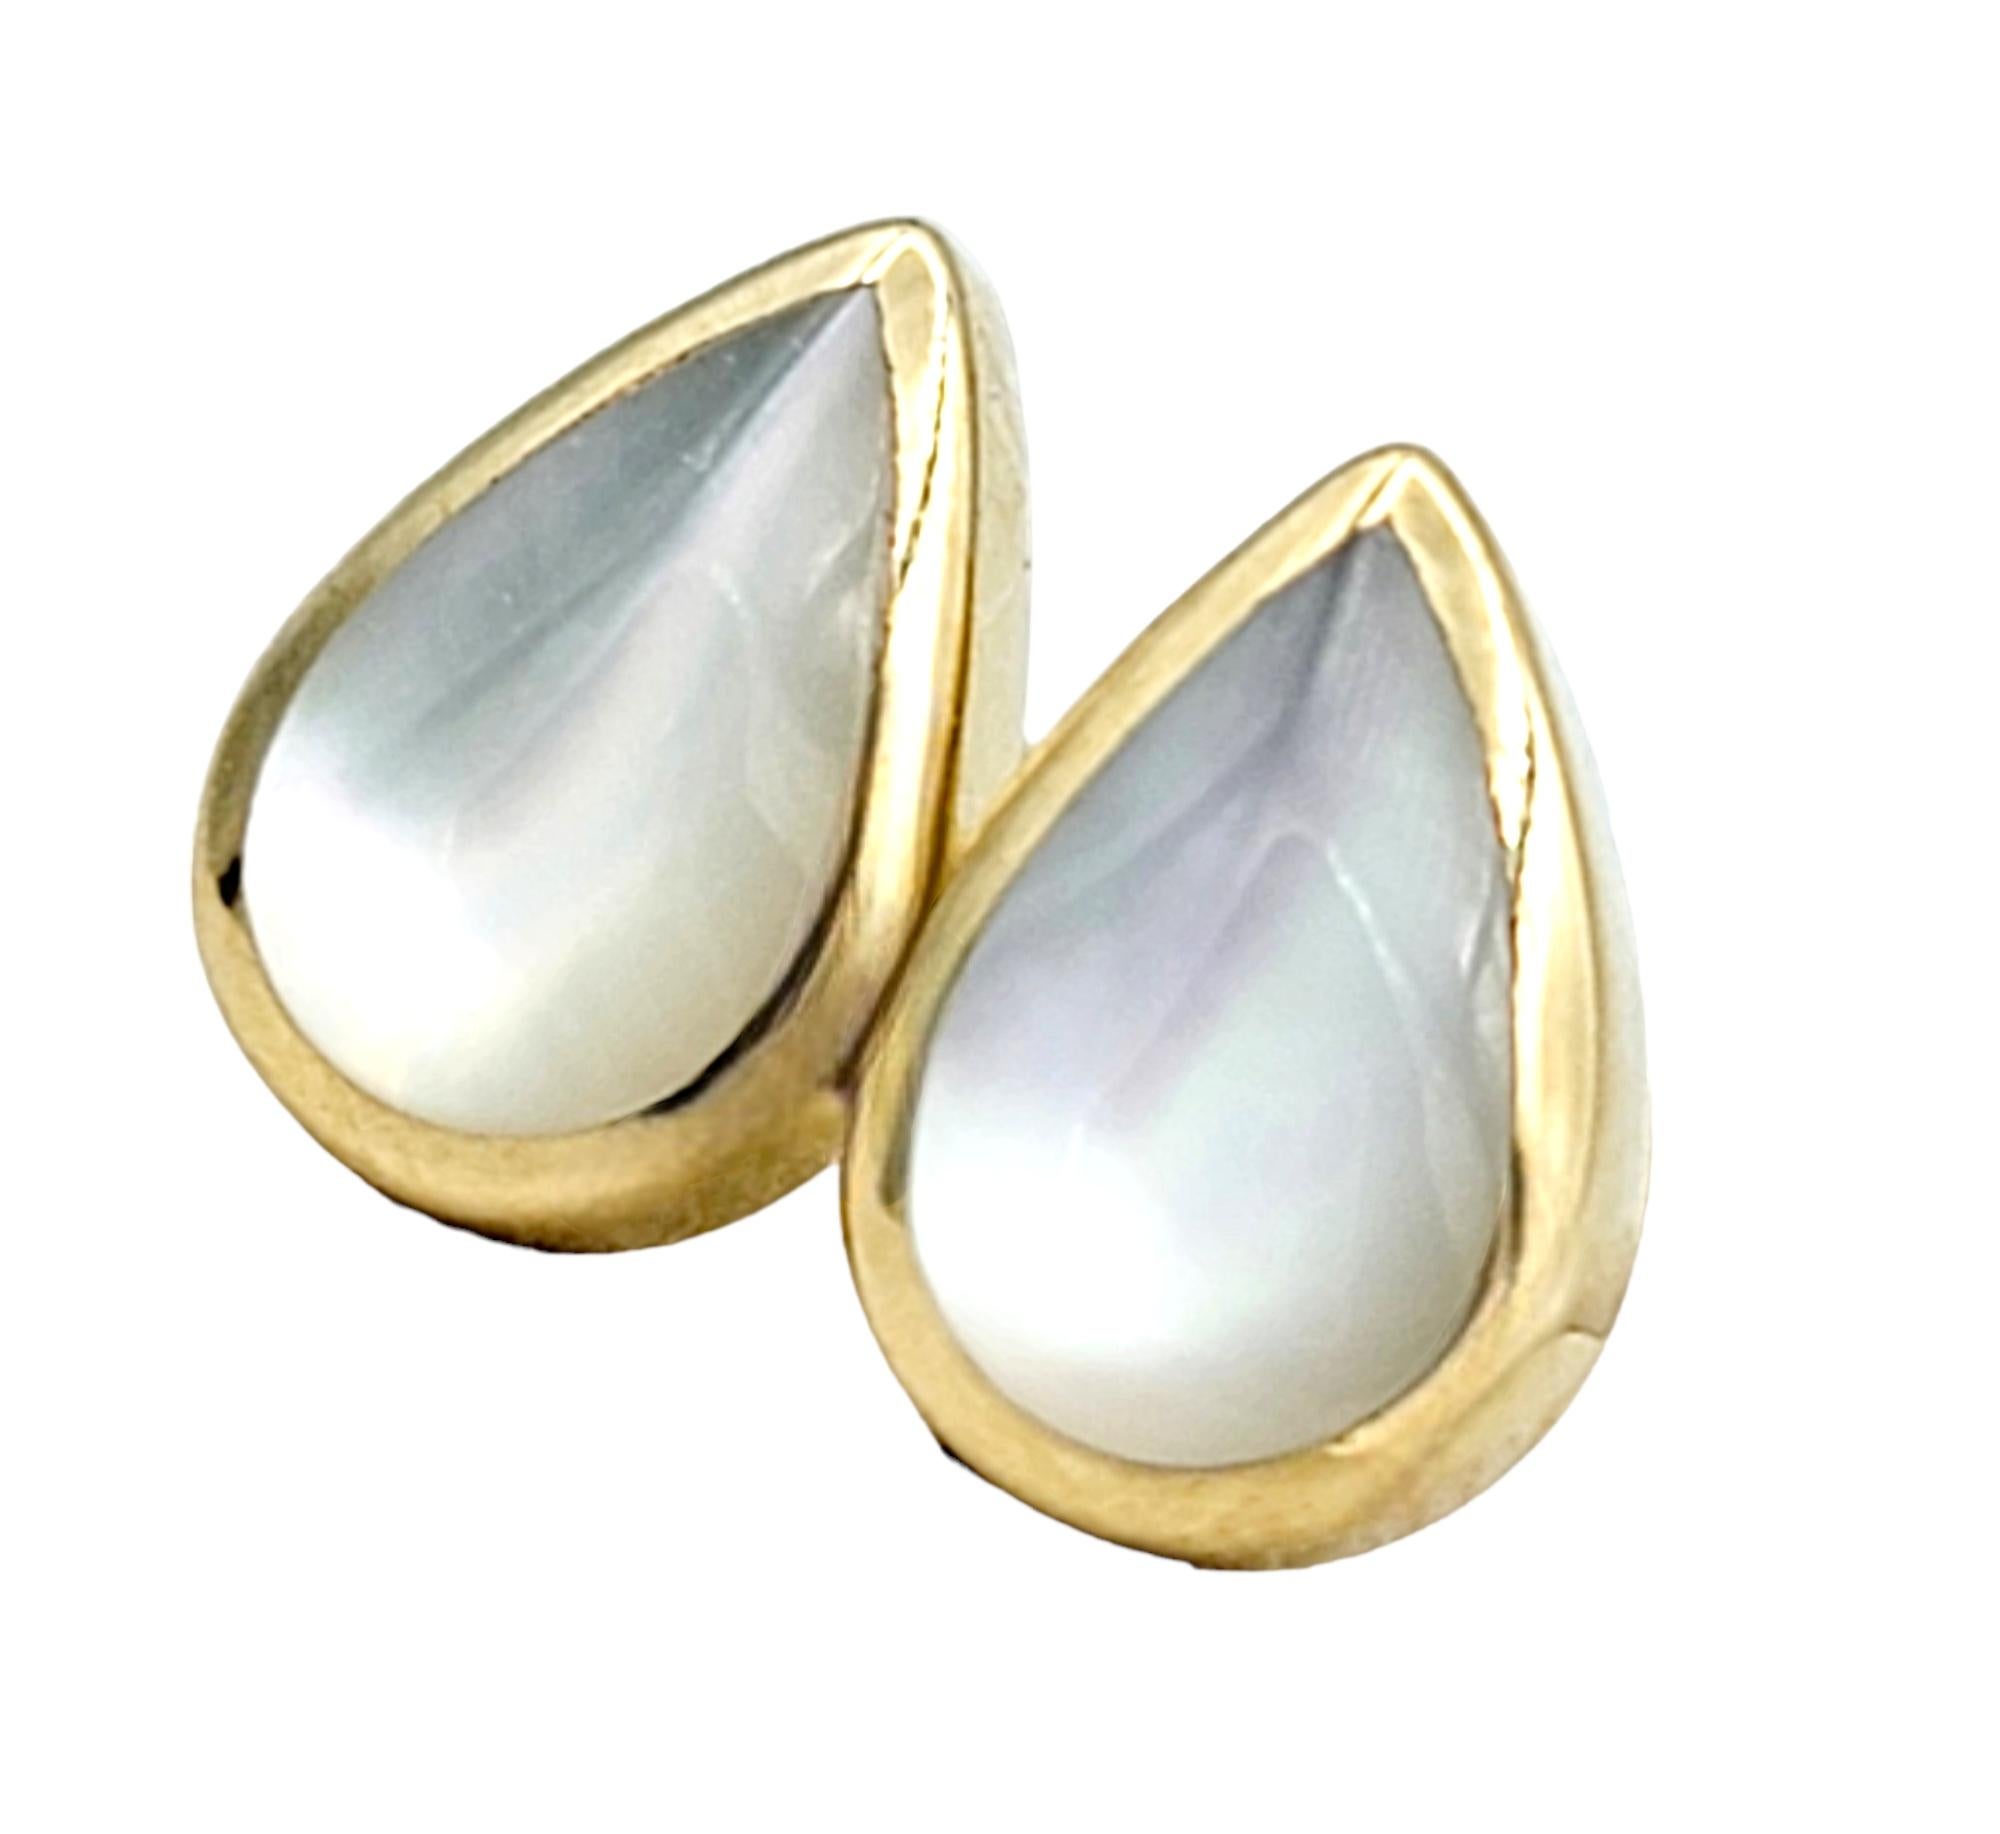 These exquisite petite Kabana stud earrings embody timeless elegance and artisan craftsmanship. Each earring features a delicate teardrop-shaped frame meticulously crafted from lustrous 14 karat yellow gold. The warm hue of the gold complements the